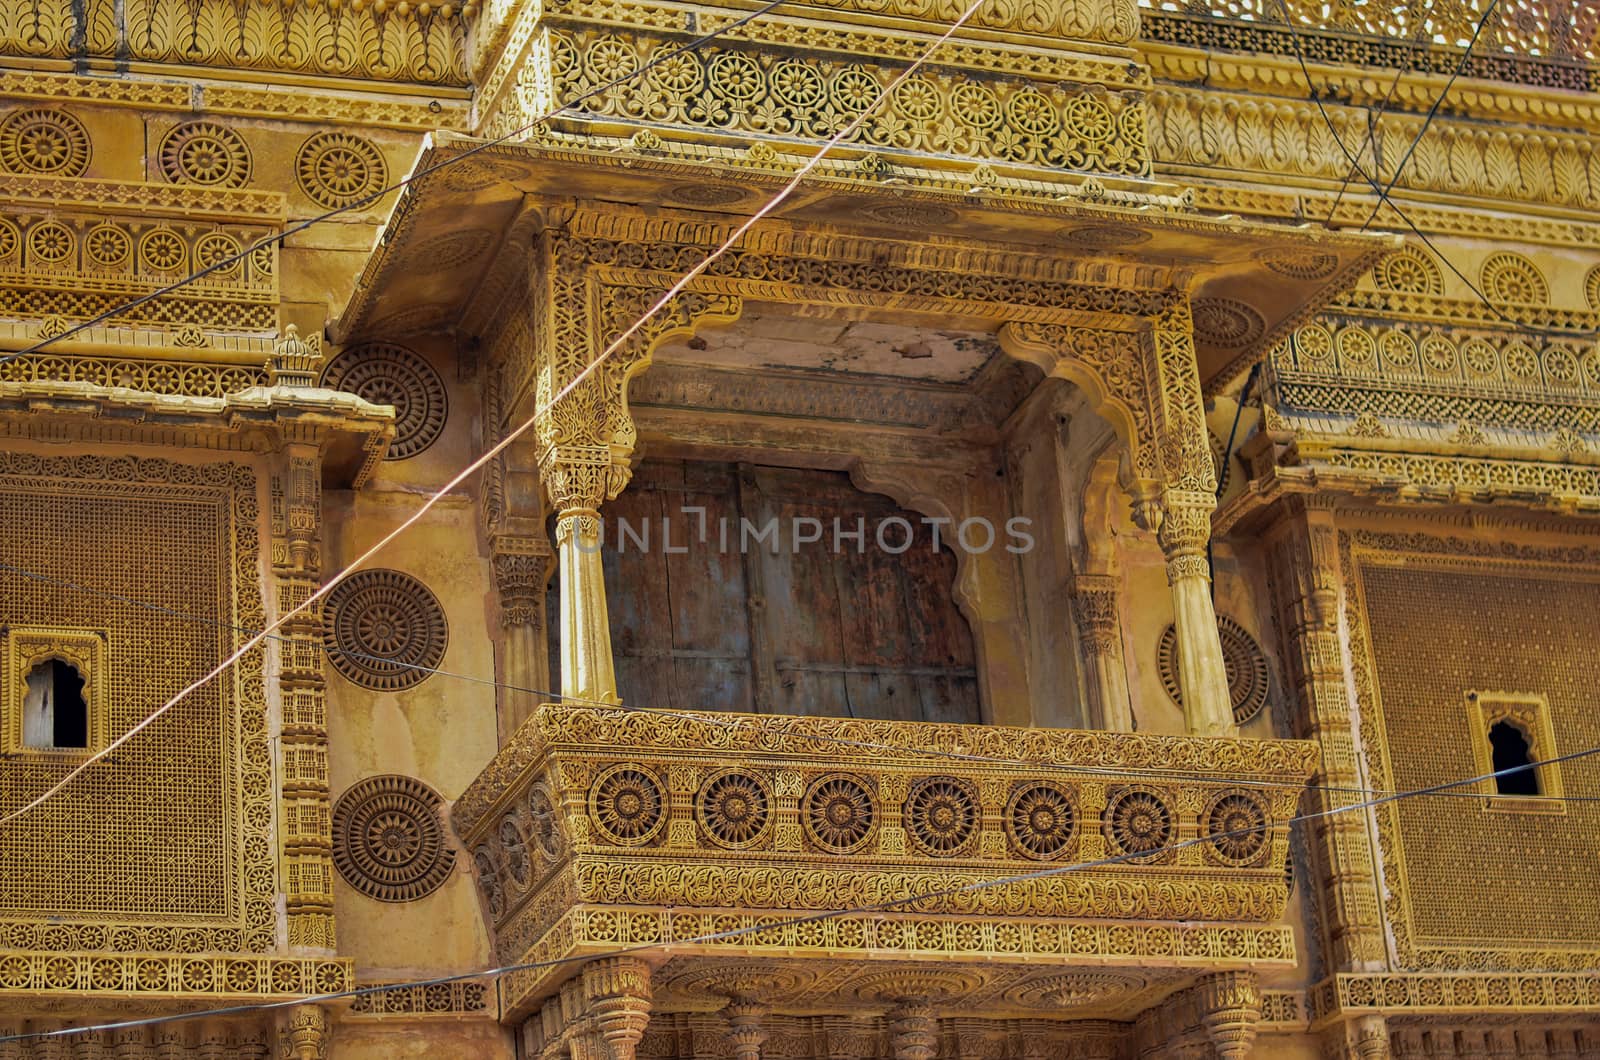 Traditional Rajasthani haveli with a decorated window at Patwon ki haveli in Jaisalmer, Rajasthan, India. Series of early-1800s palaces, now a museum featuring intricate carvings, furniture & artwork. by jayantbahel